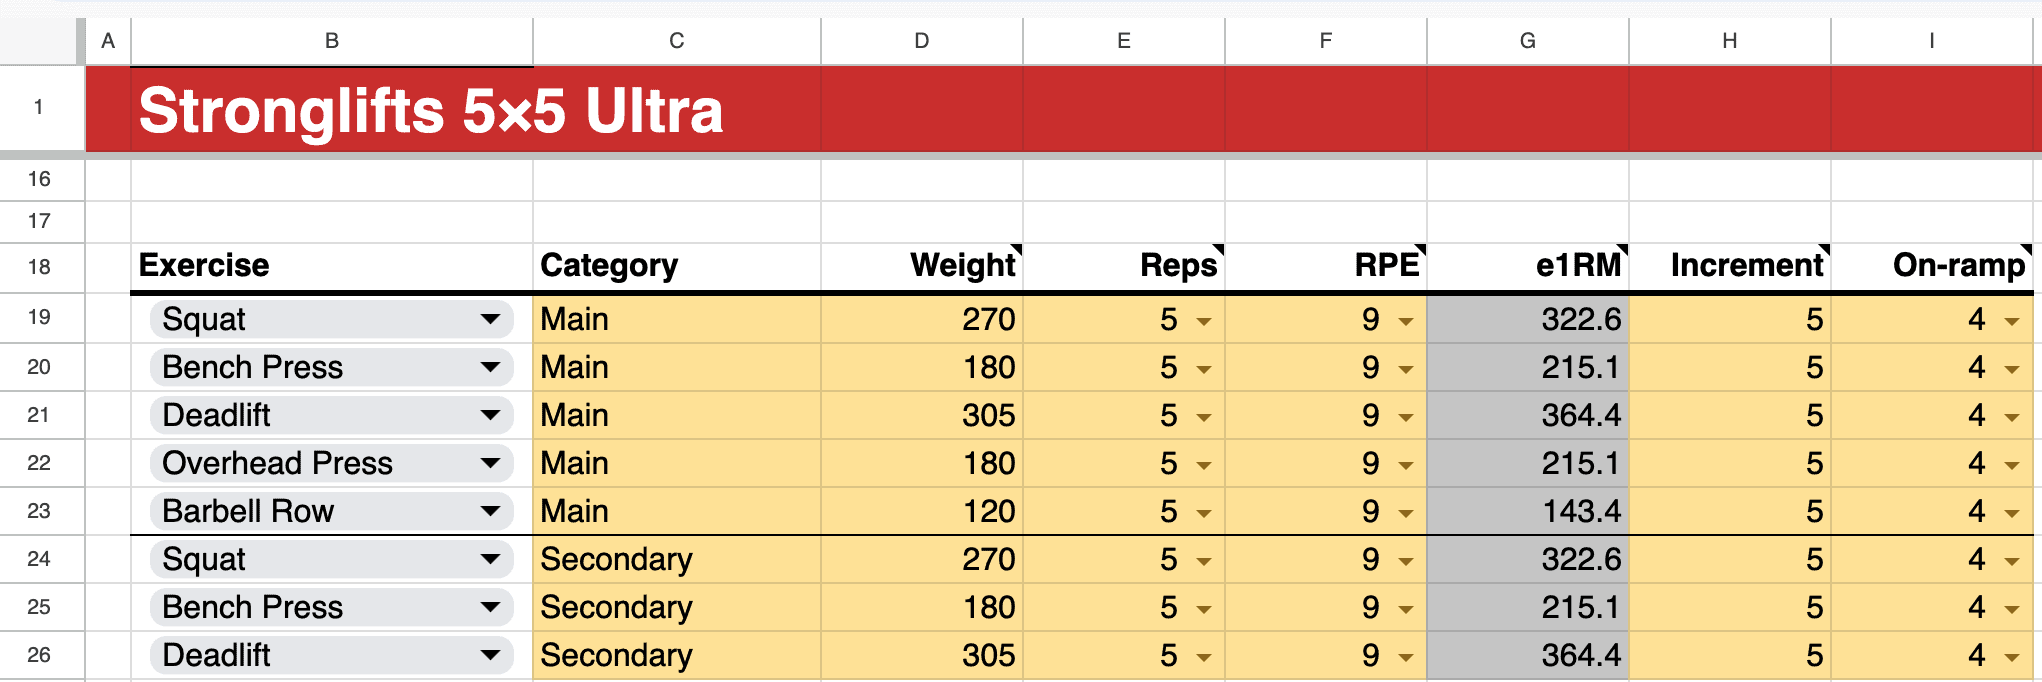 On-ramp settings Stronglifts 5x5 Ultra spreadsheet